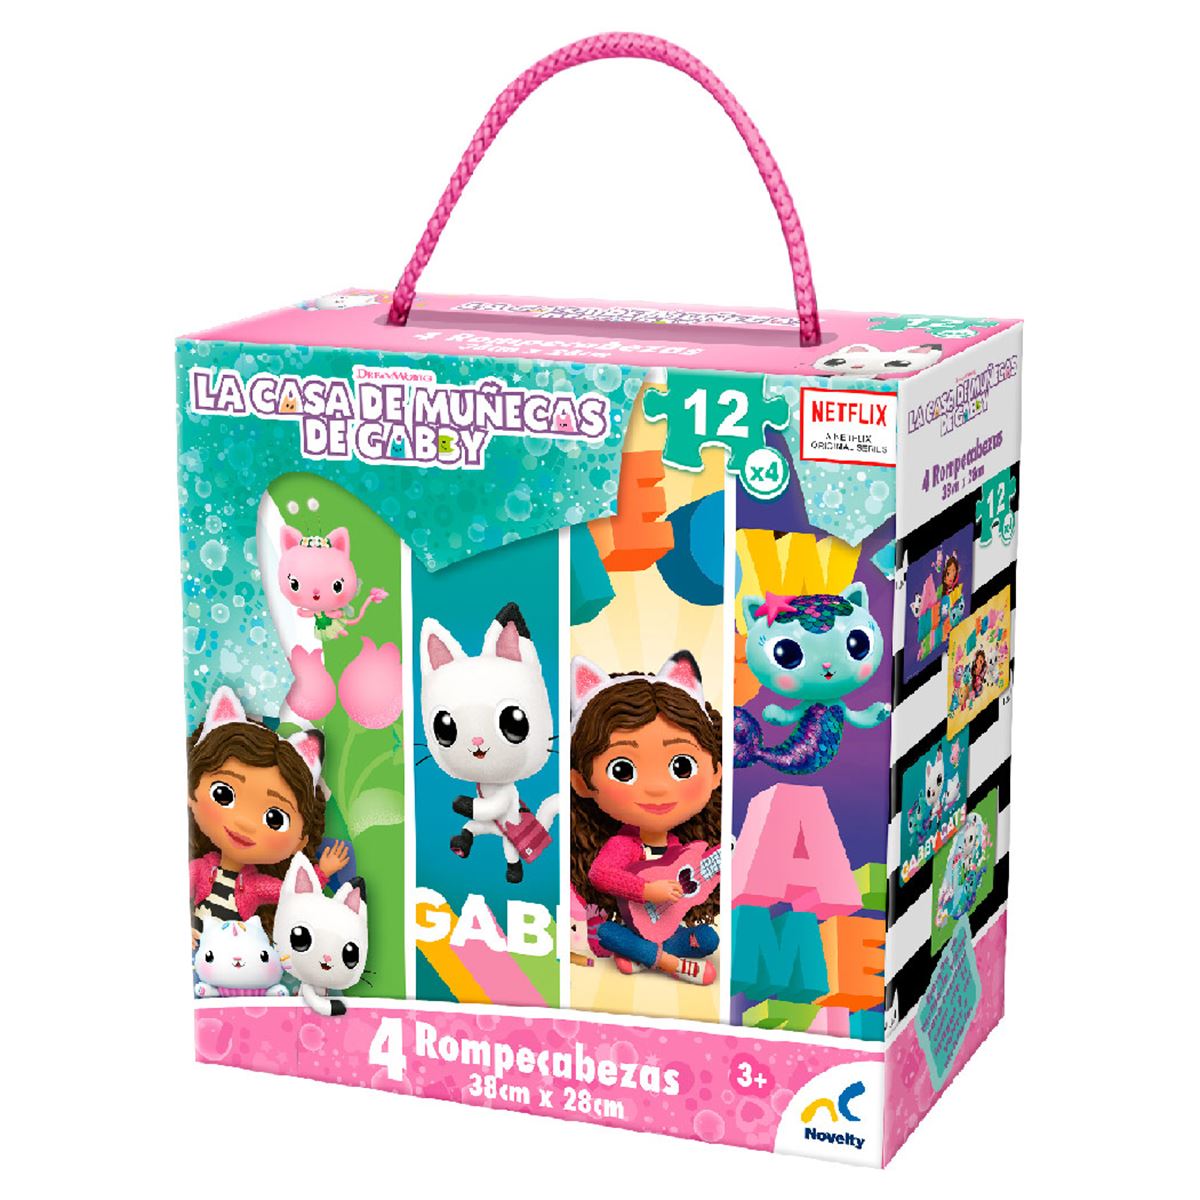 Clementoni 4in1 Puzzle Gabby's Dollhouse 21524